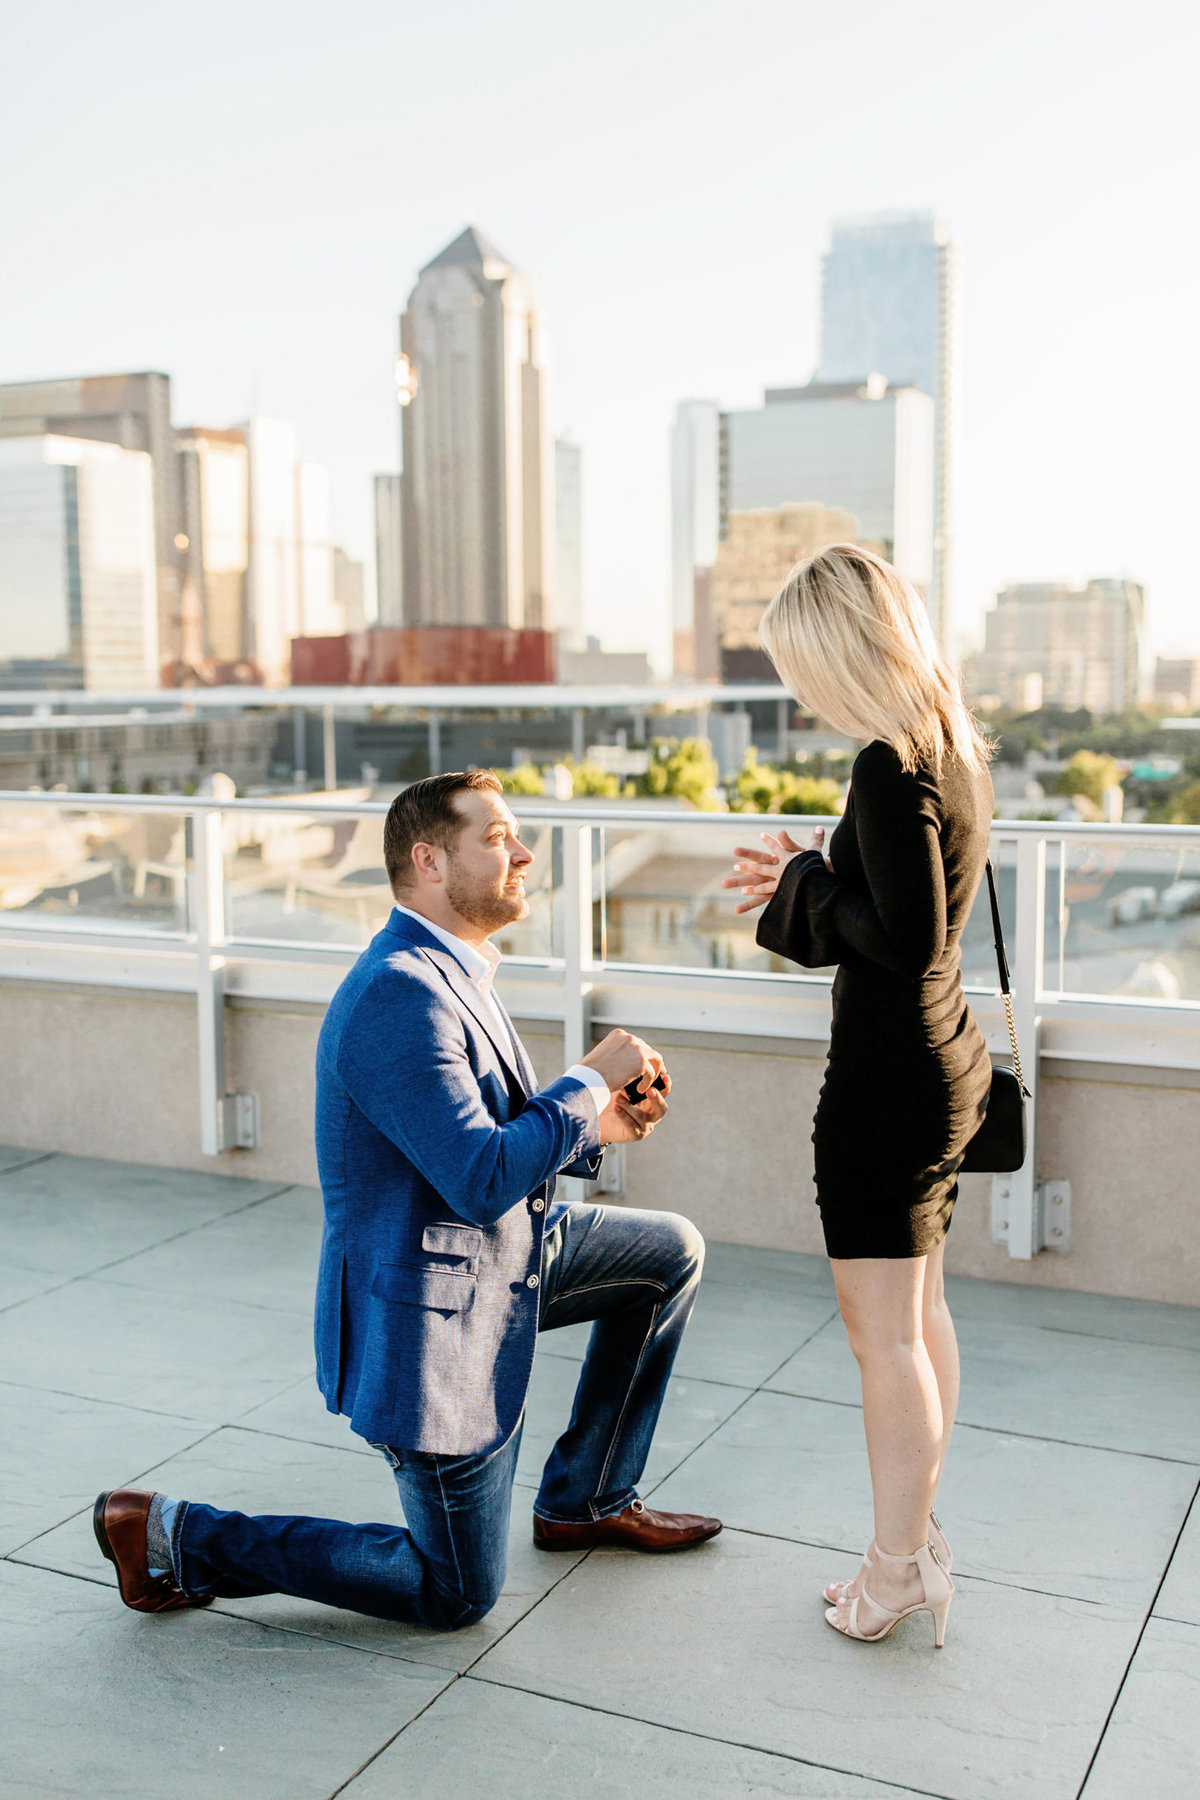 Eric & Megan - Downtown Dallas Rooftop Proposal & Engagement Session-30